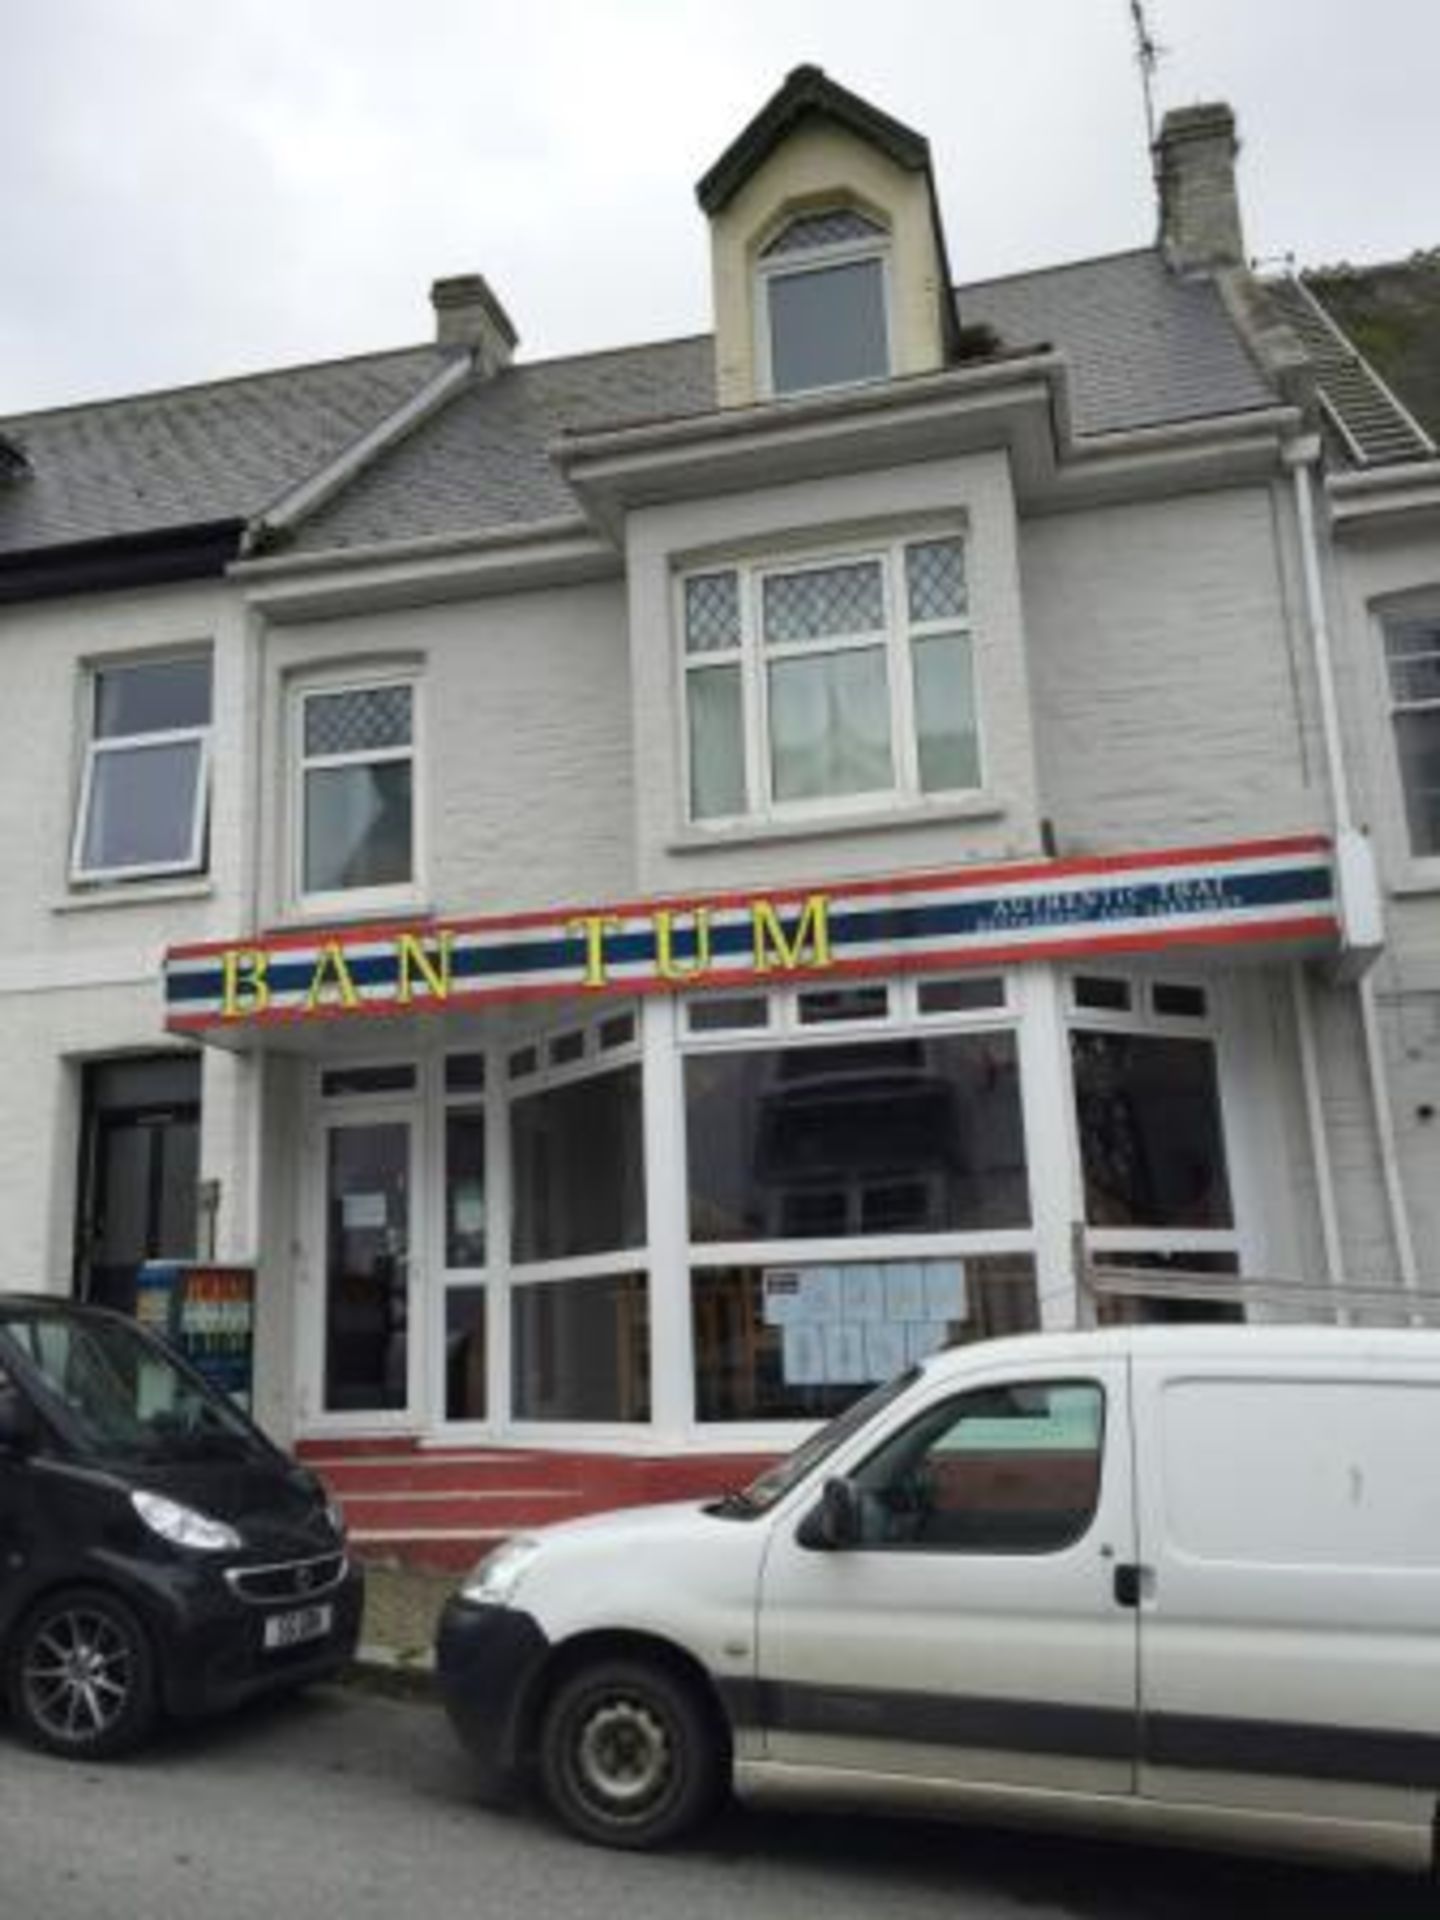 CORNWALL - FREEHOLD LICENSED RESTAURANT WITH ACCOMMODATION ABOVE